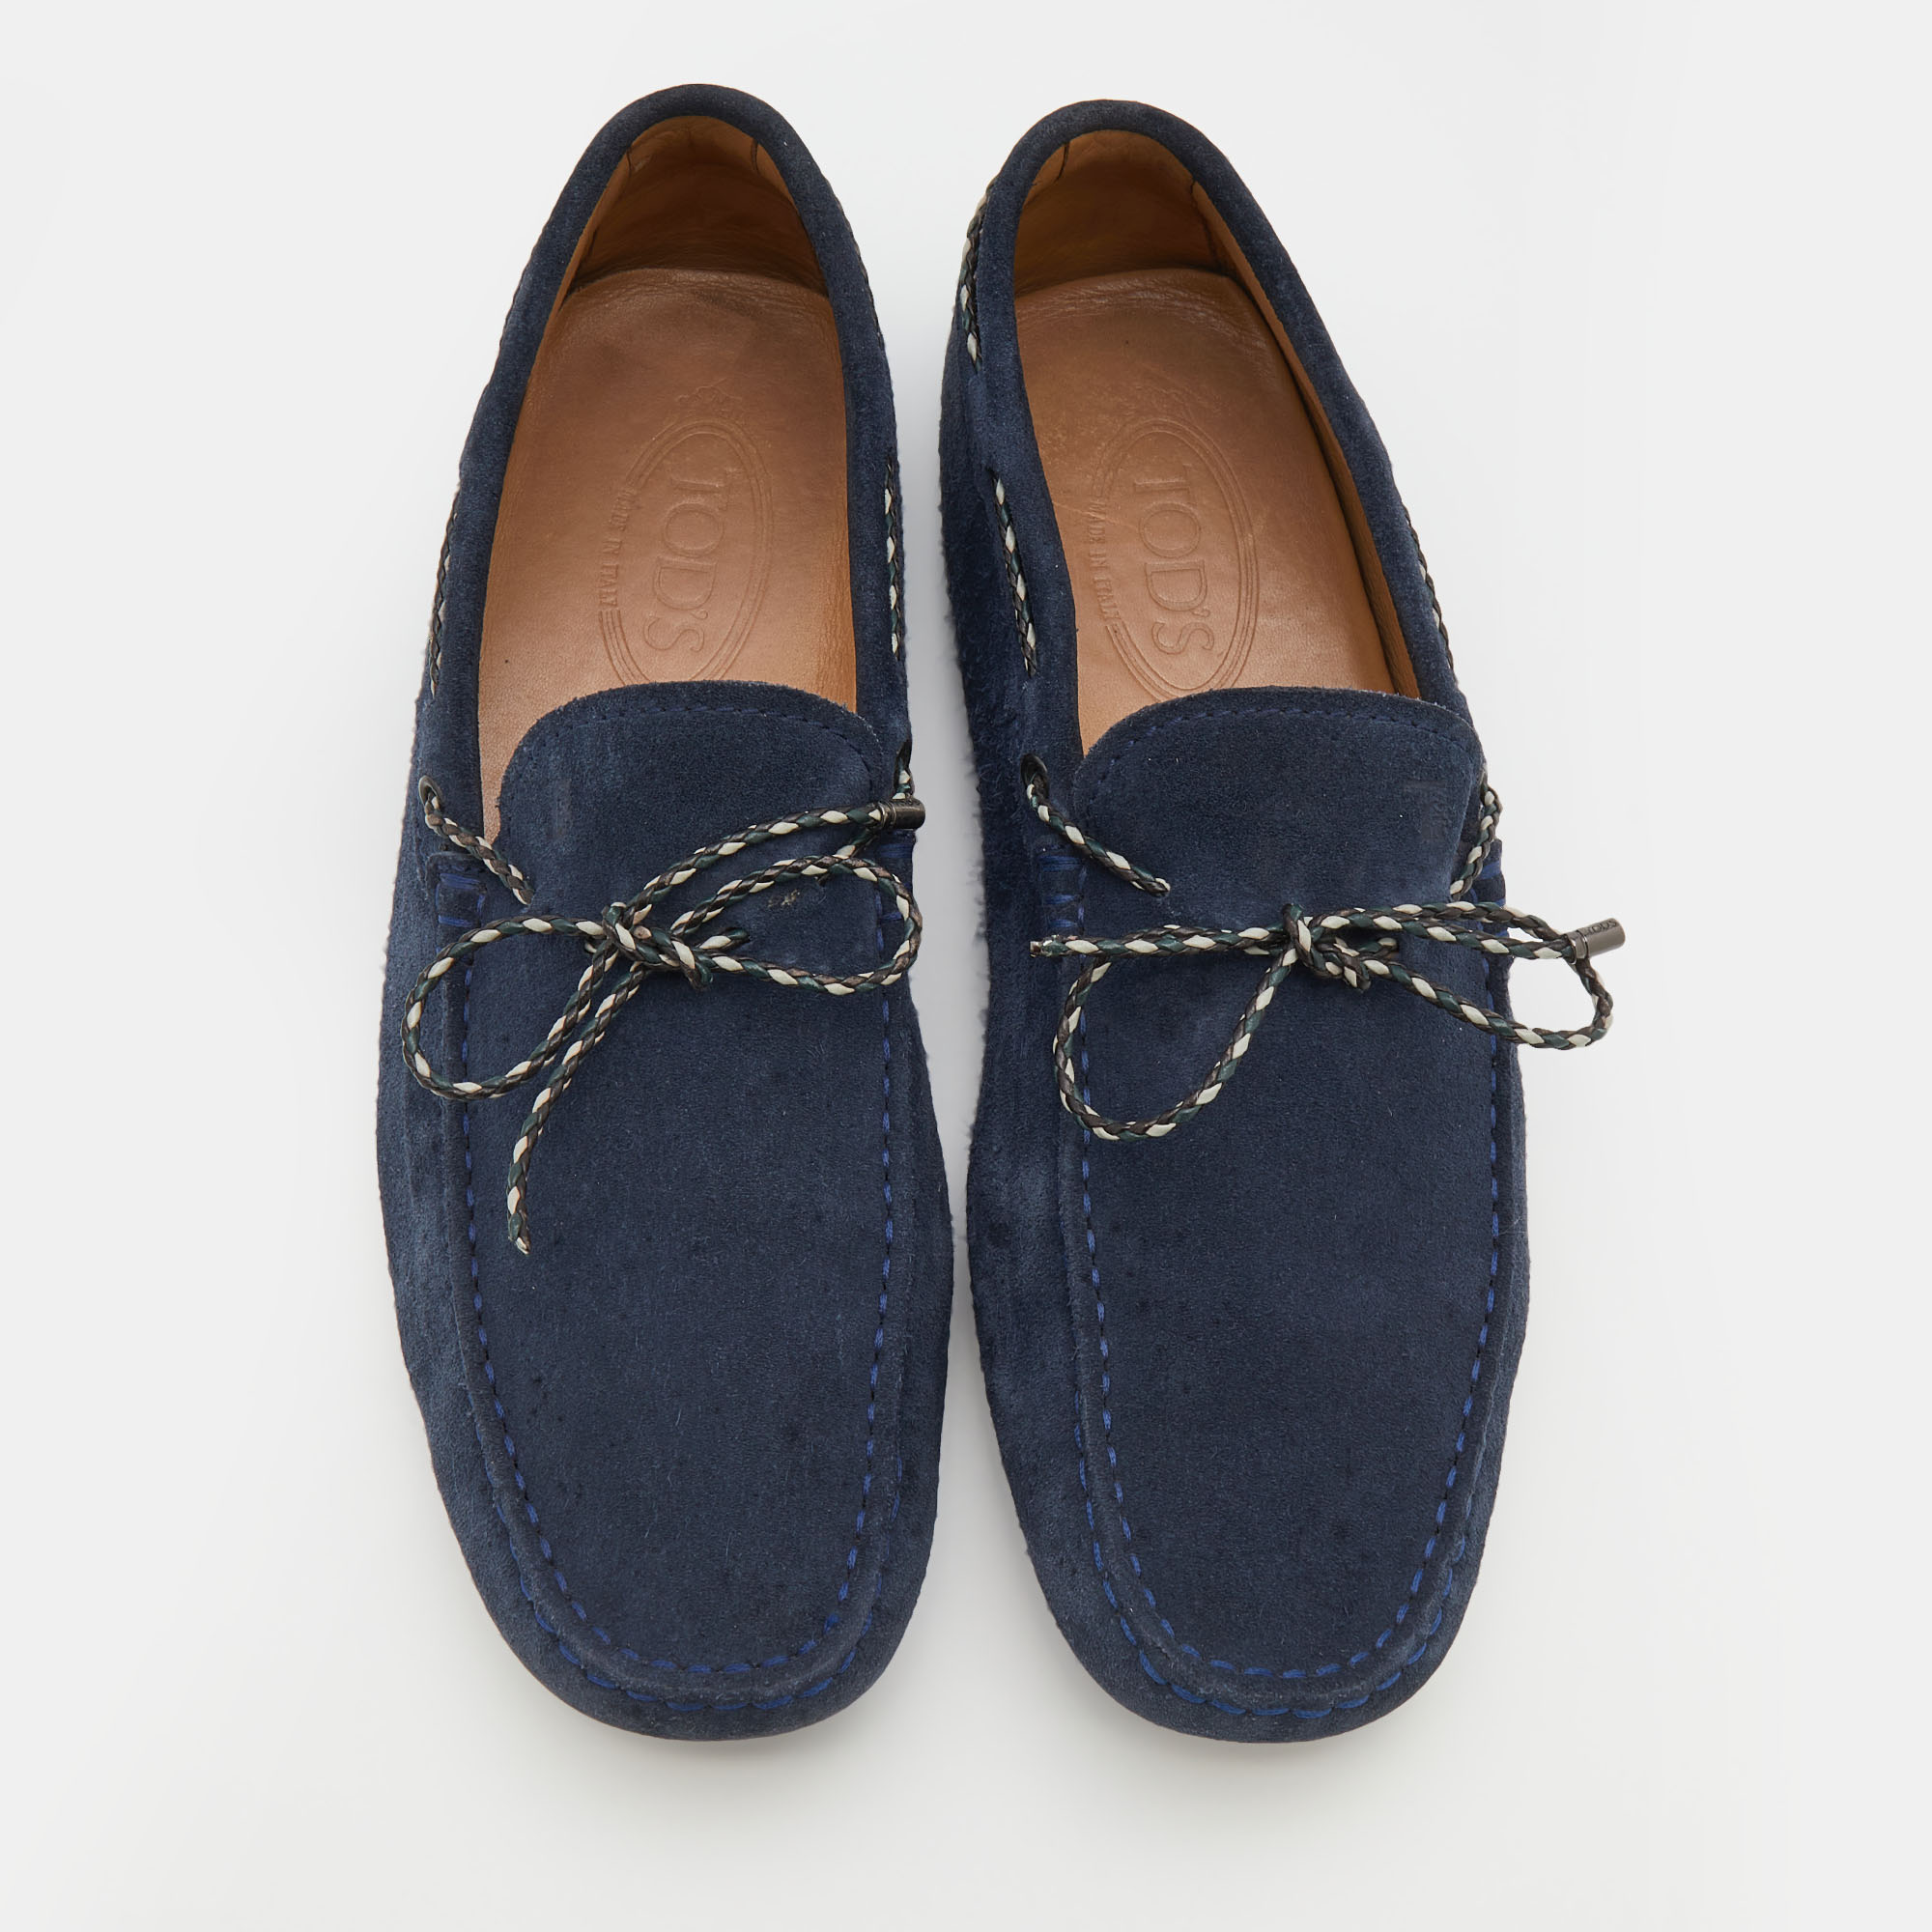 Tod's Navy Blue Suede Bow Slip On Loafers Size 42